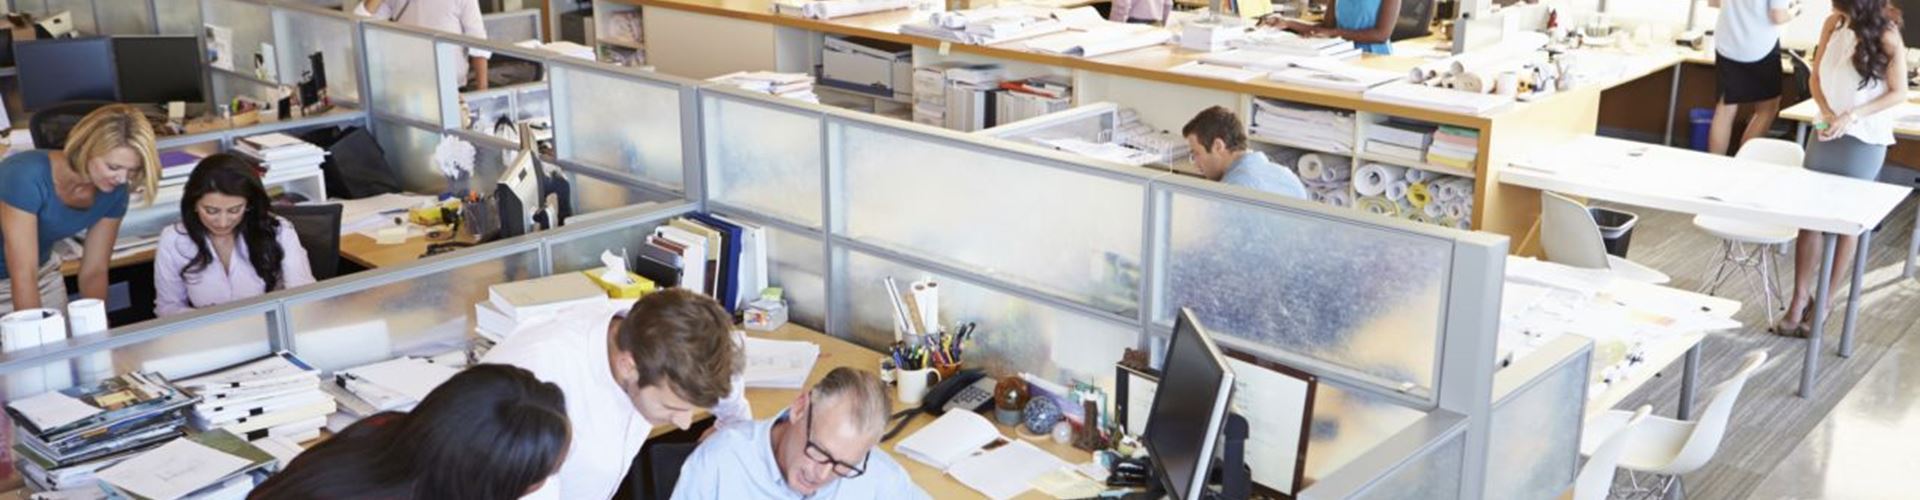 Traditional offices could eventually disappear, claims PwC report